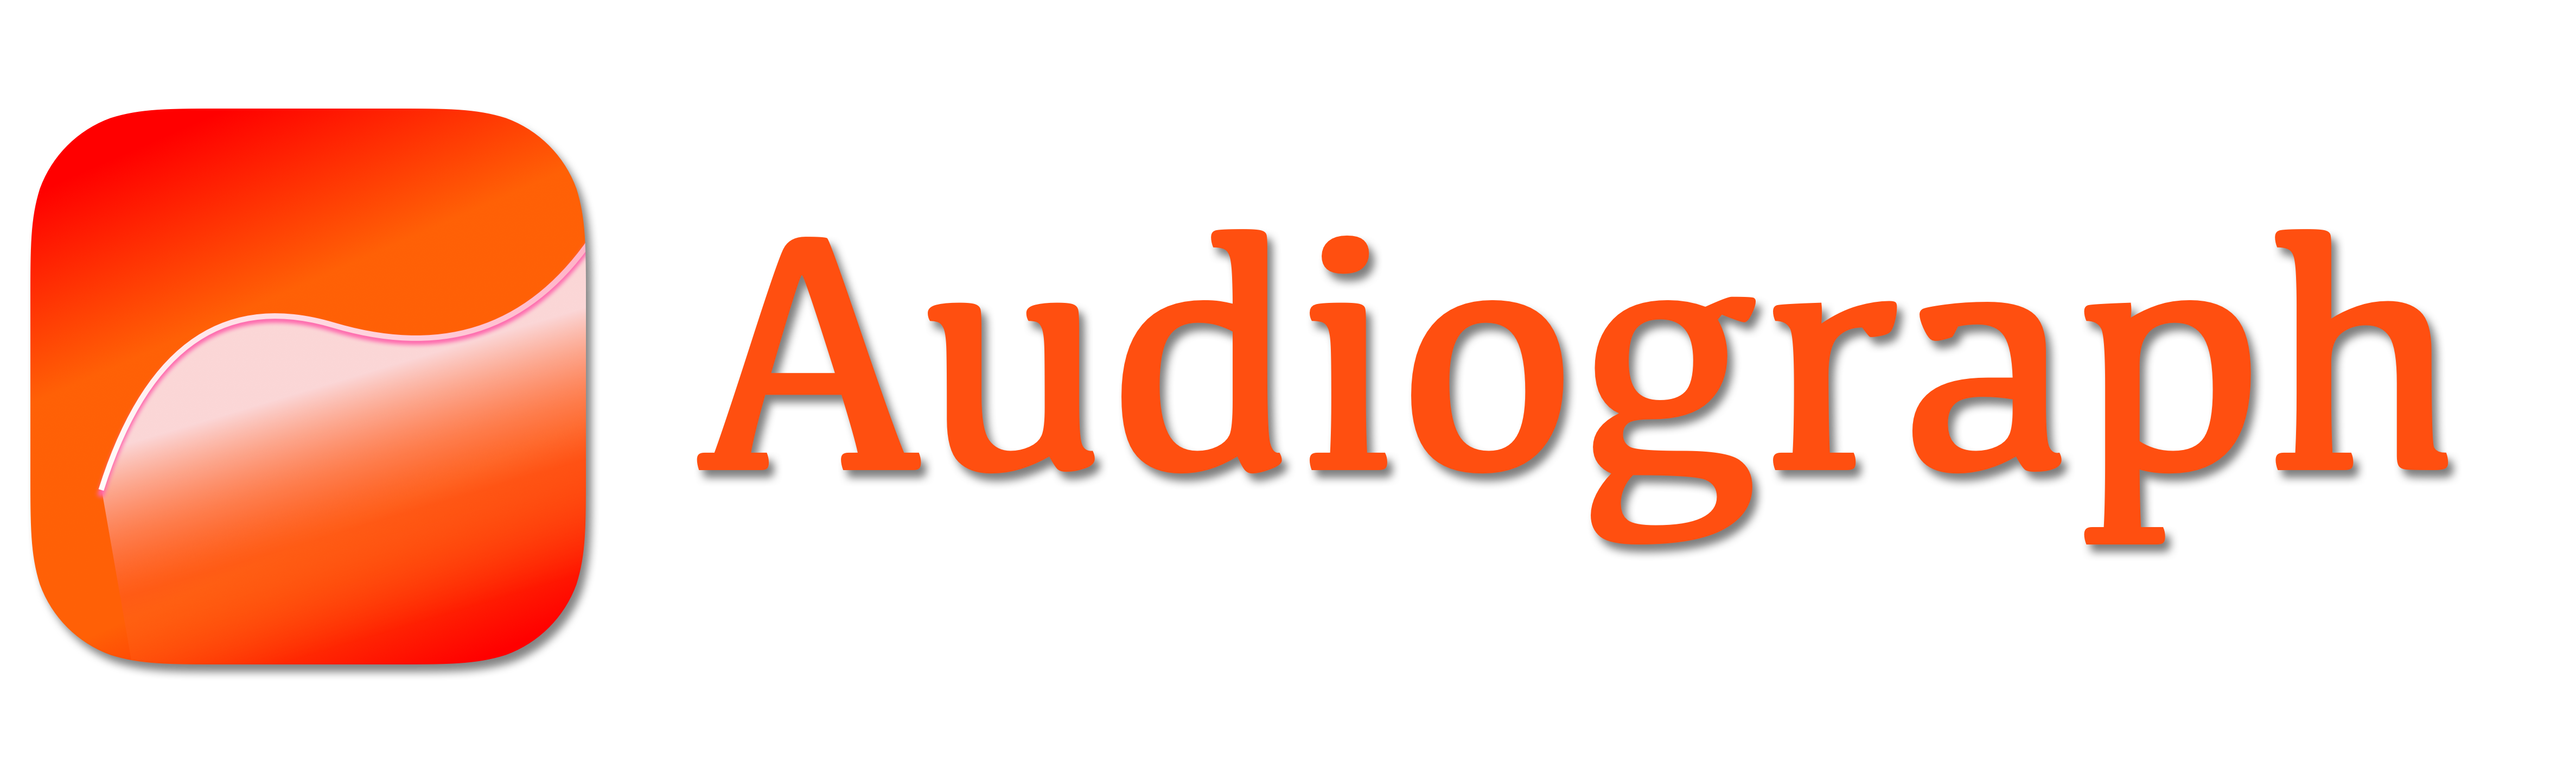 Logo of Audiograph project